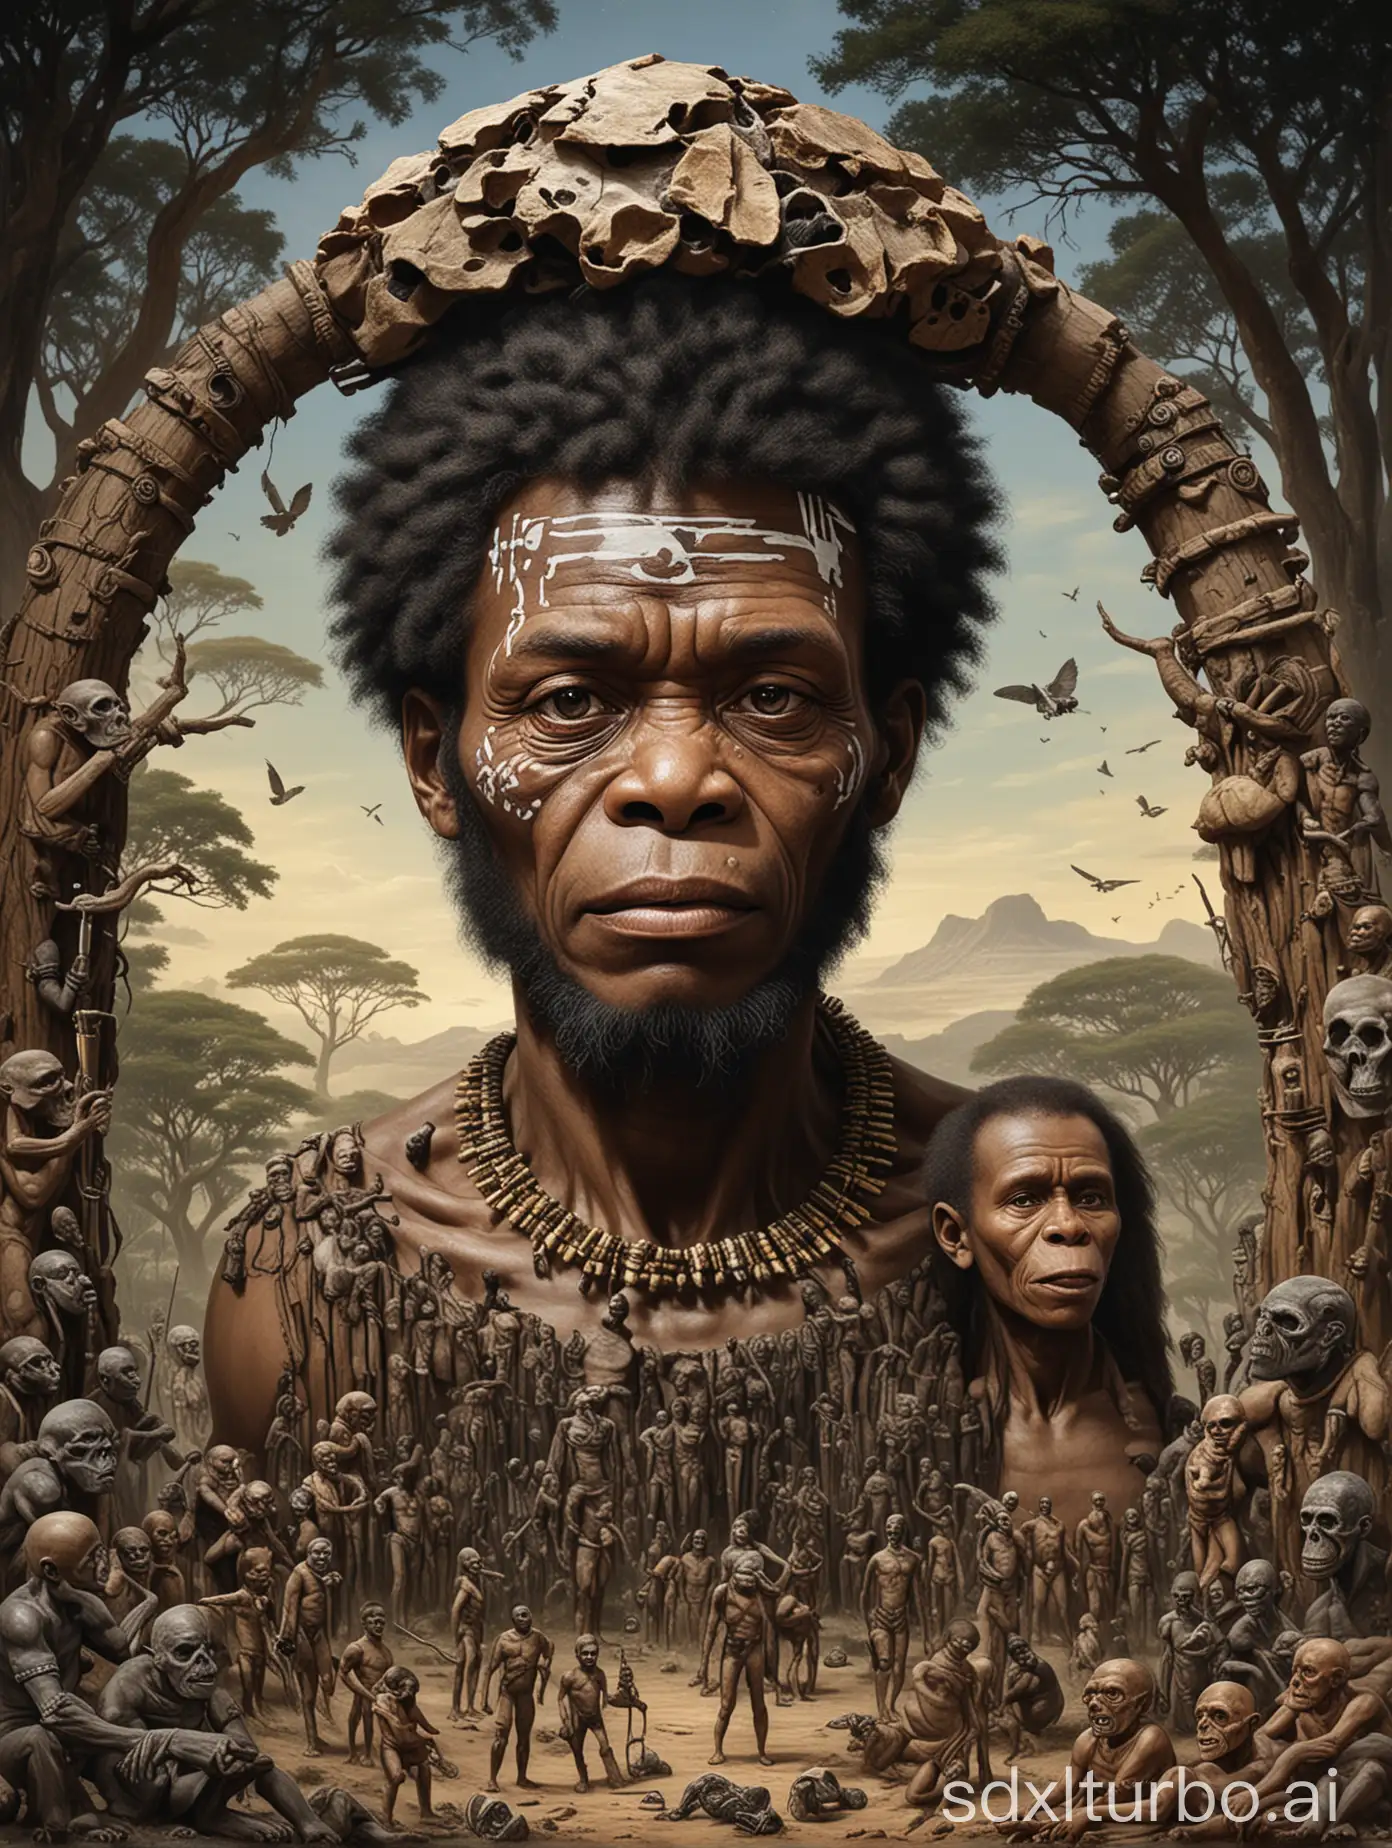 homo naledi and brother homosapiens depicted by isaac asimov